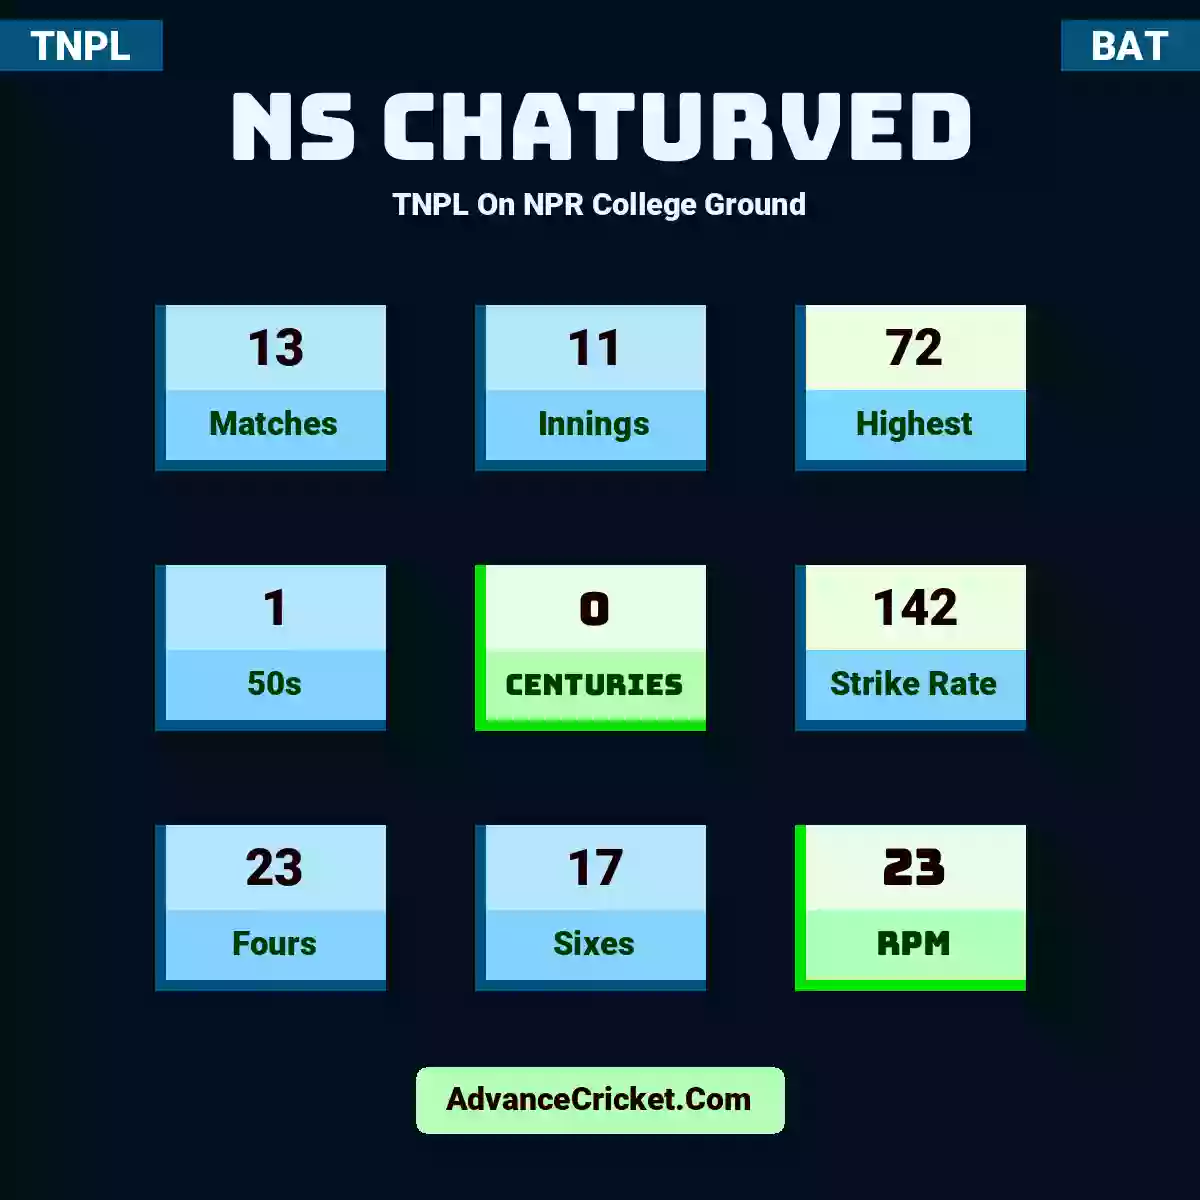 NS Chaturved TNPL  On NPR College Ground, NS Chaturved played 13 matches, scored 72 runs as highest, 1 half-centuries, and 0 centuries, with a strike rate of 142. N.Chaturved hit 23 fours and 17 sixes, with an RPM of 23.